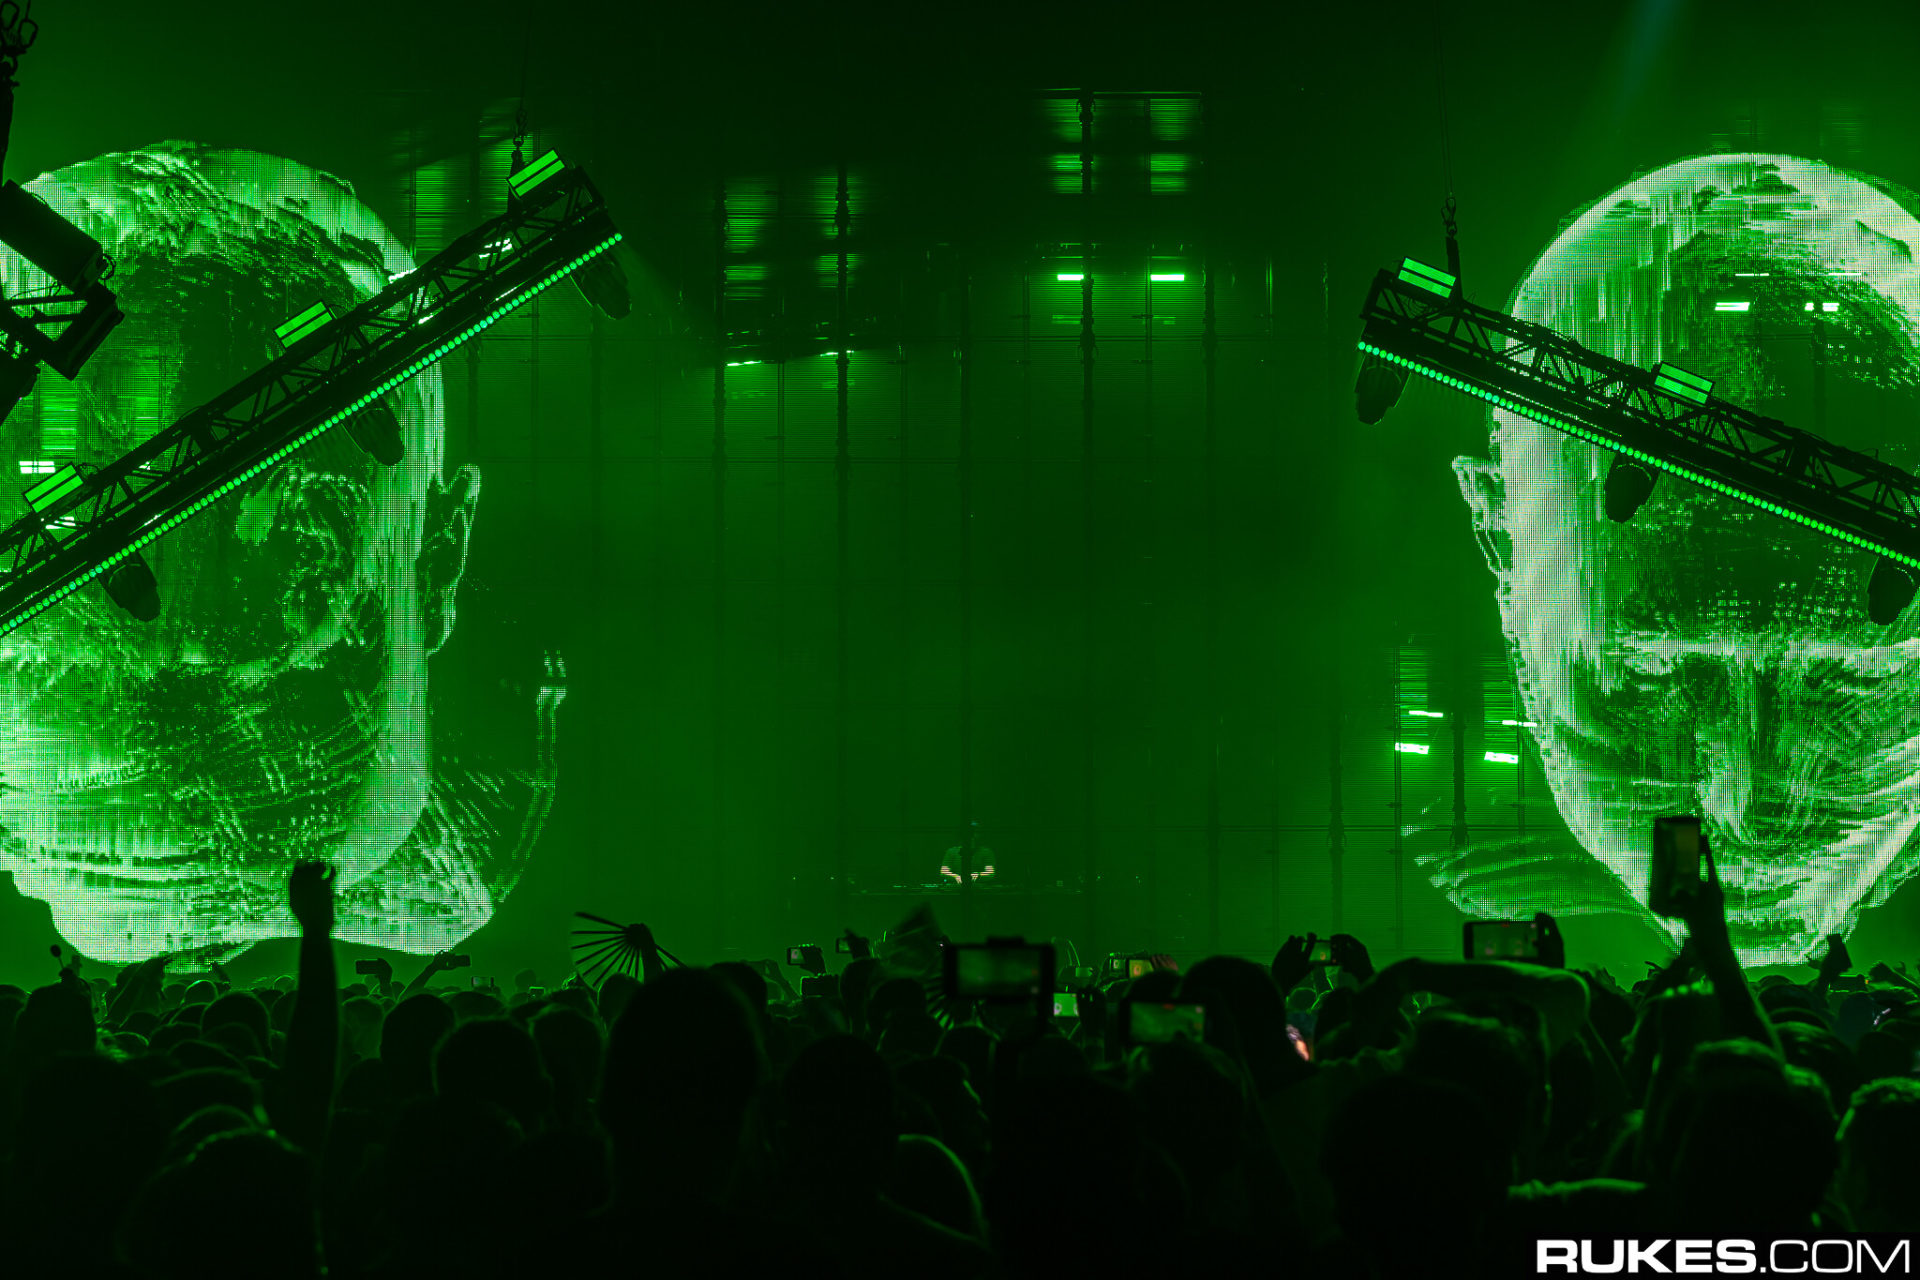 Eric Prydz performs in New York in 2019